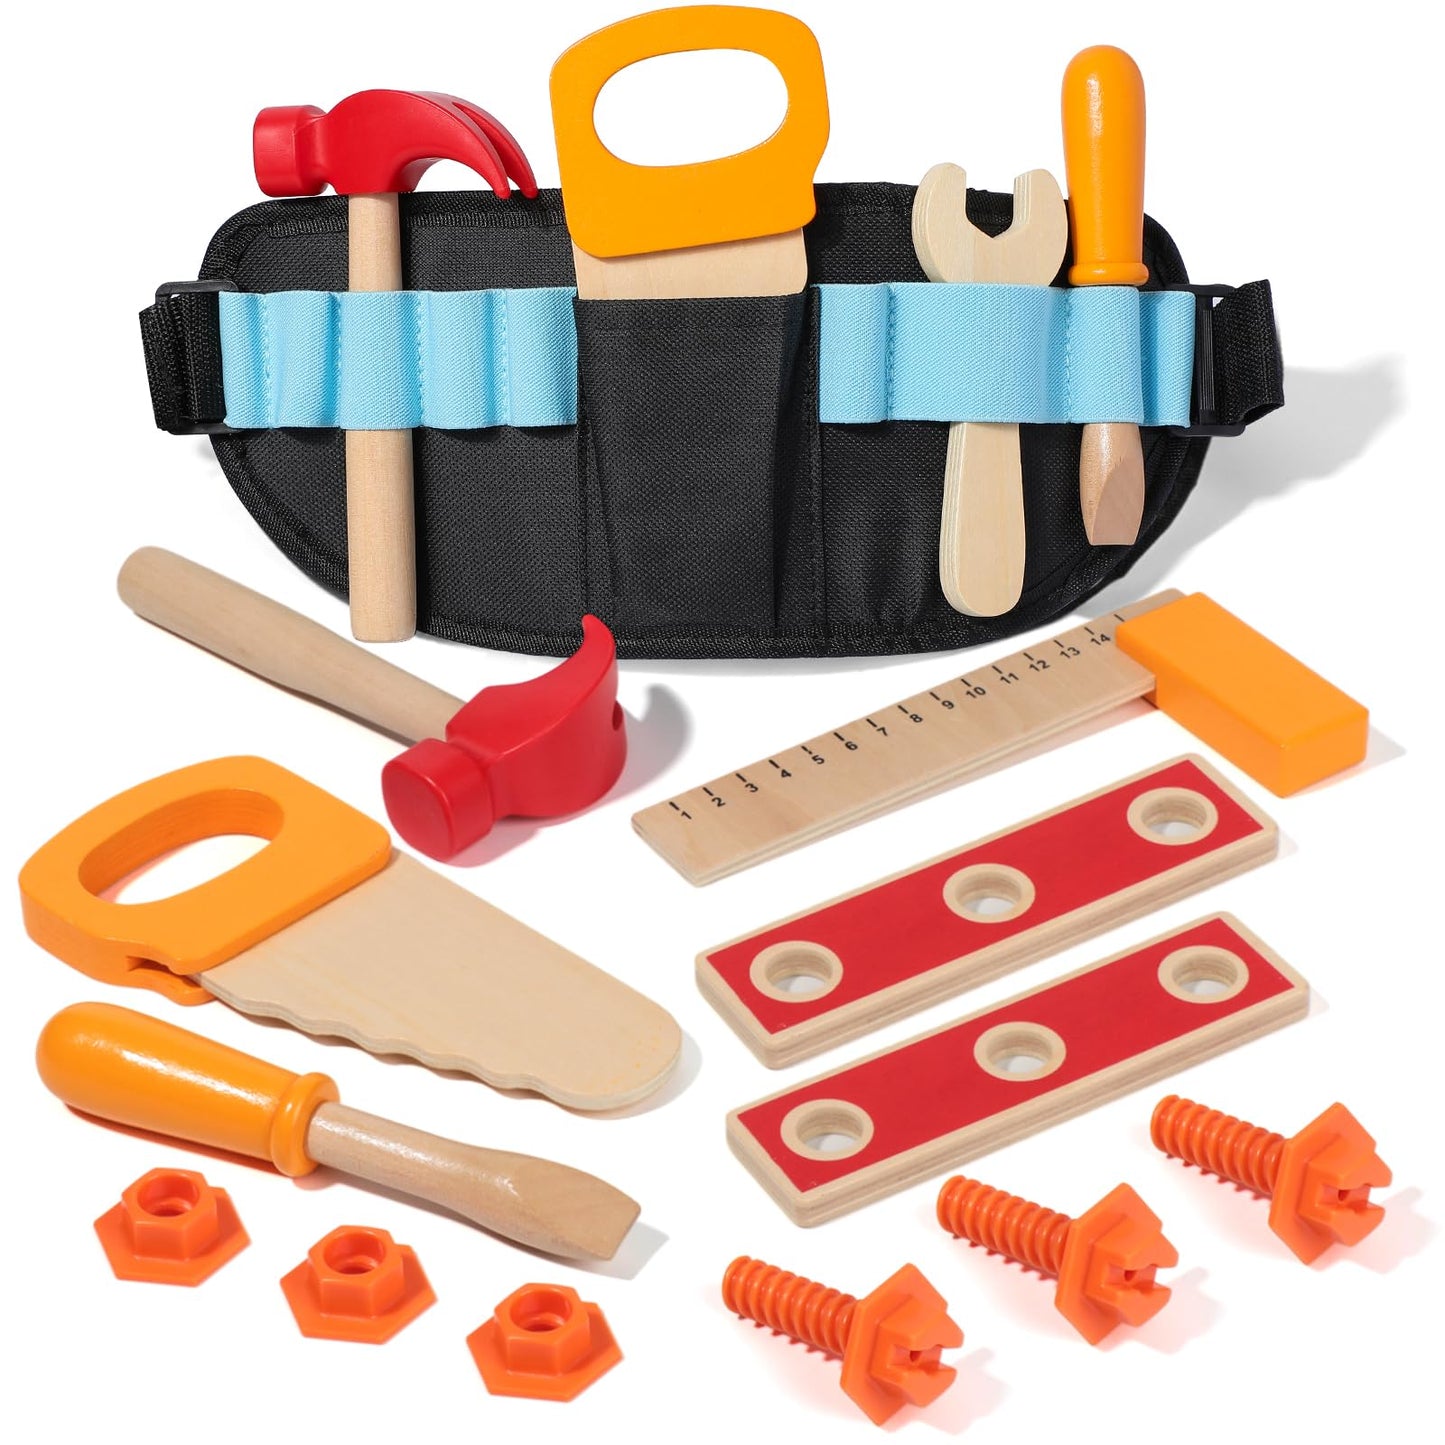 Popsunny Montesorri Wooden Tool Set for Toddlers Aged 3 4 5, Kids Construction Toy with Worker Belt Bag, Educational Pretend Play Kit for Boys Girls